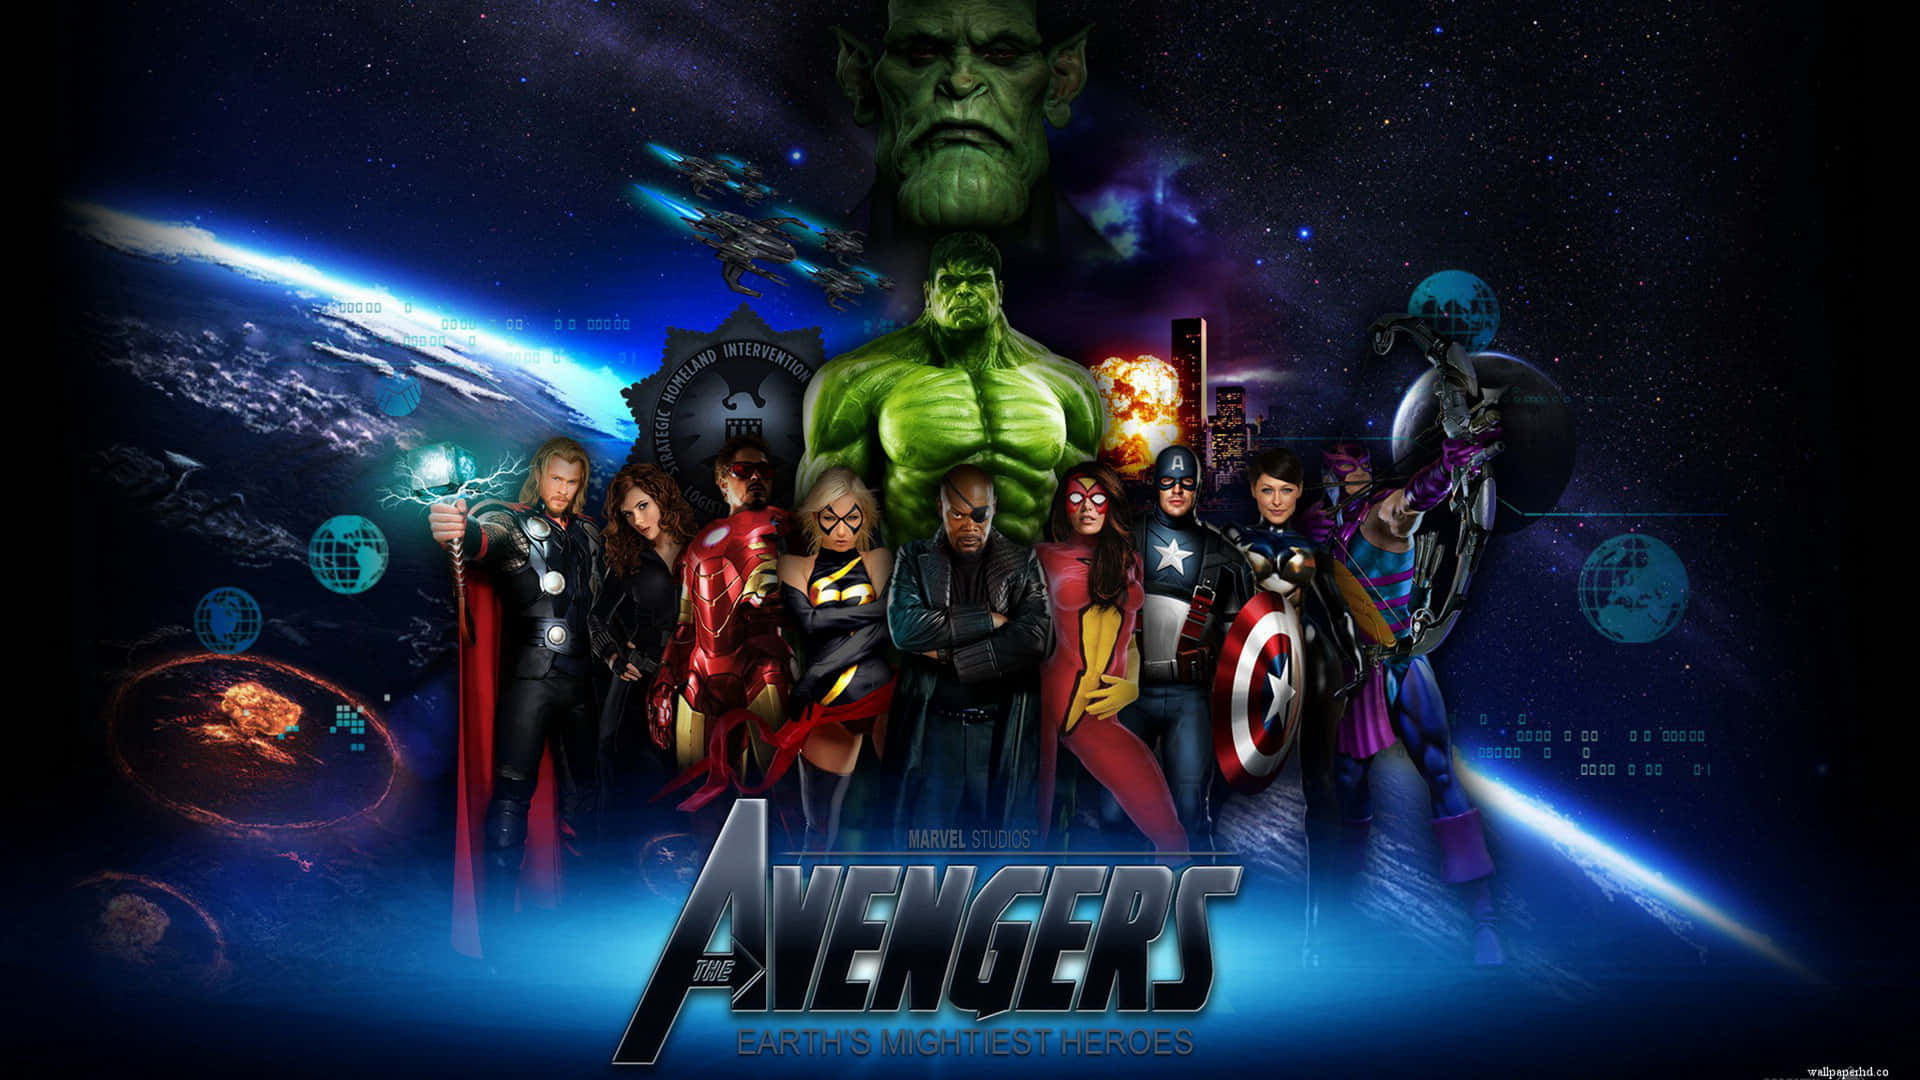 The Avengers Movie Poster With The Characters Wallpaper